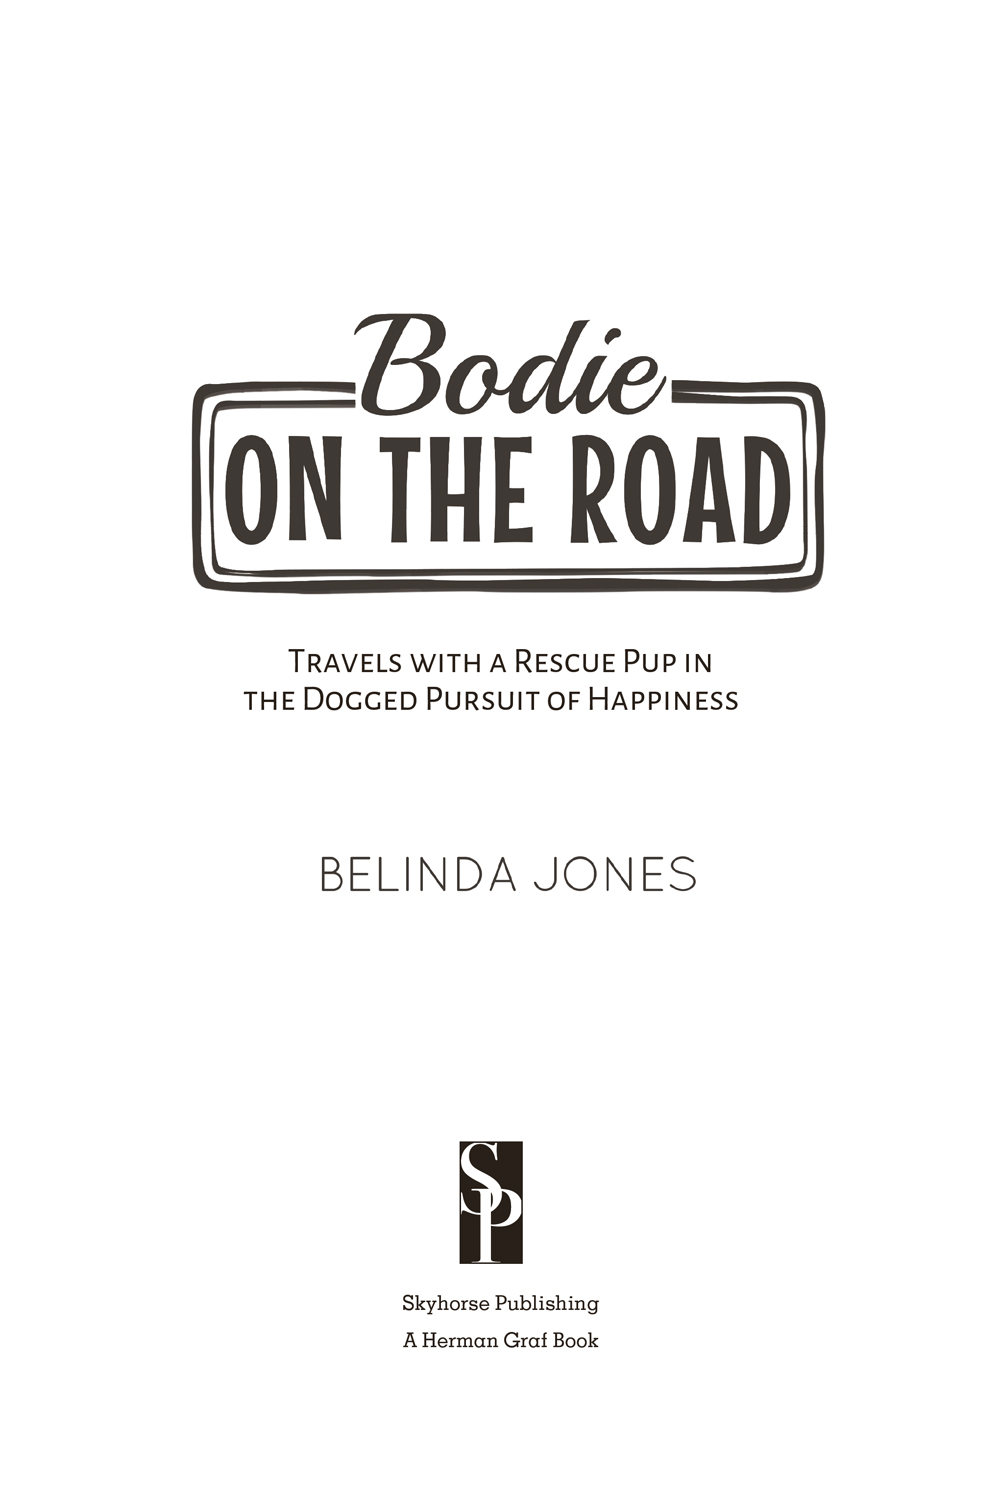 Copyright 2017 by Belinda Jones First published by Summersdale Publishers Ltd - photo 3